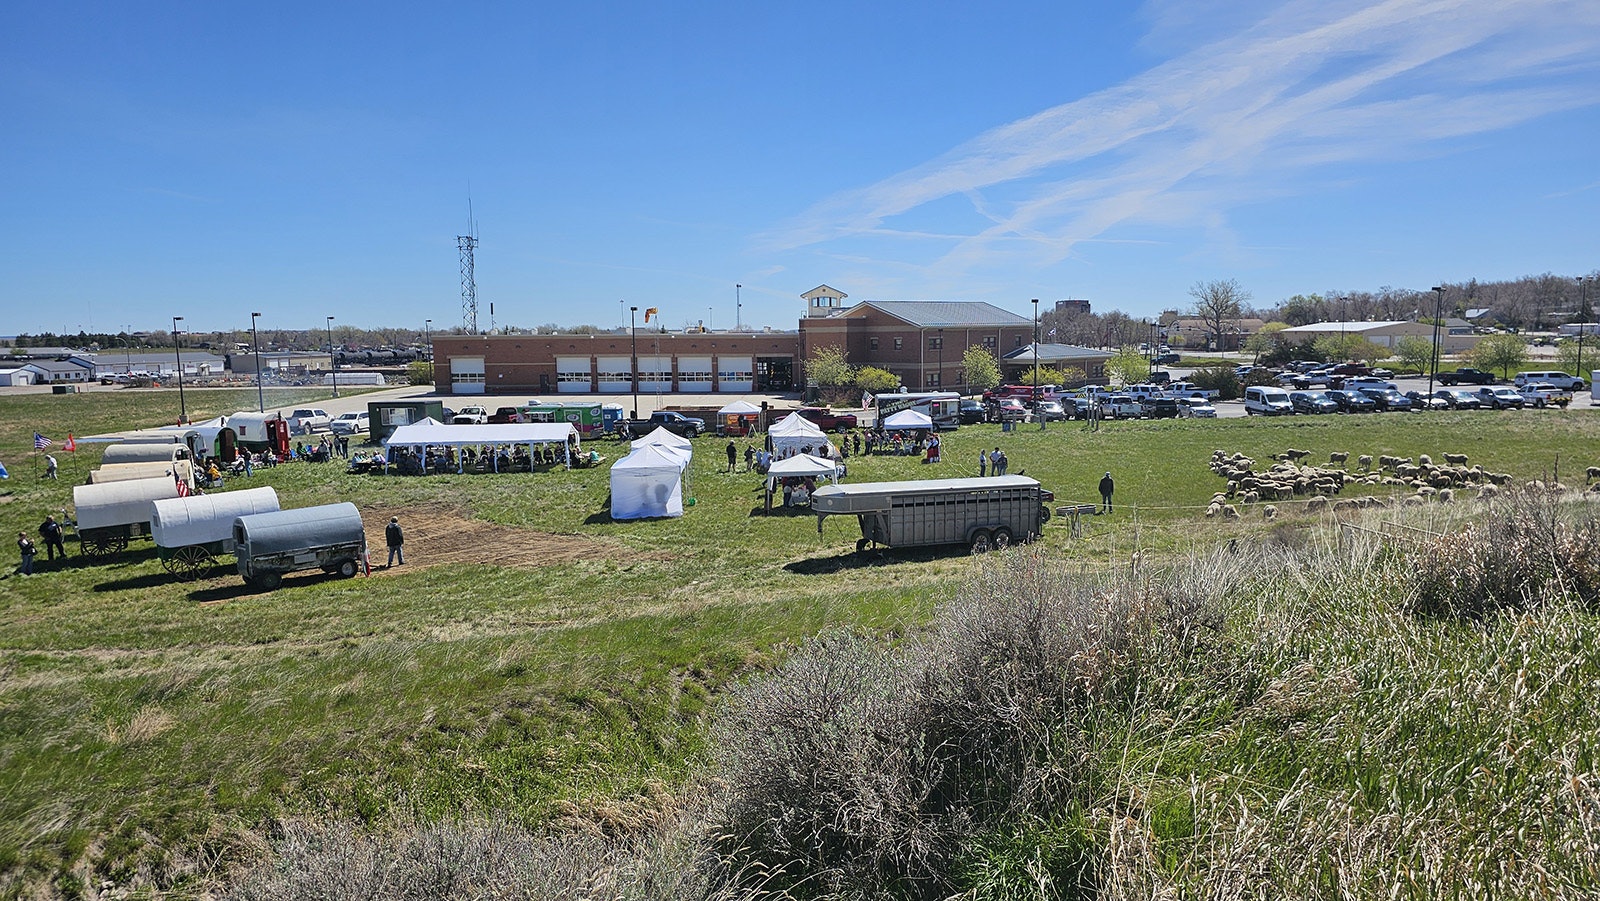 Gillette's third annual Sheepherding Festival included sheep wagons, left, and a herd of sheep, right. In the center, Basque sausages were being served for lunch, and a Basque poet and accordion player were entertaining a crowd.